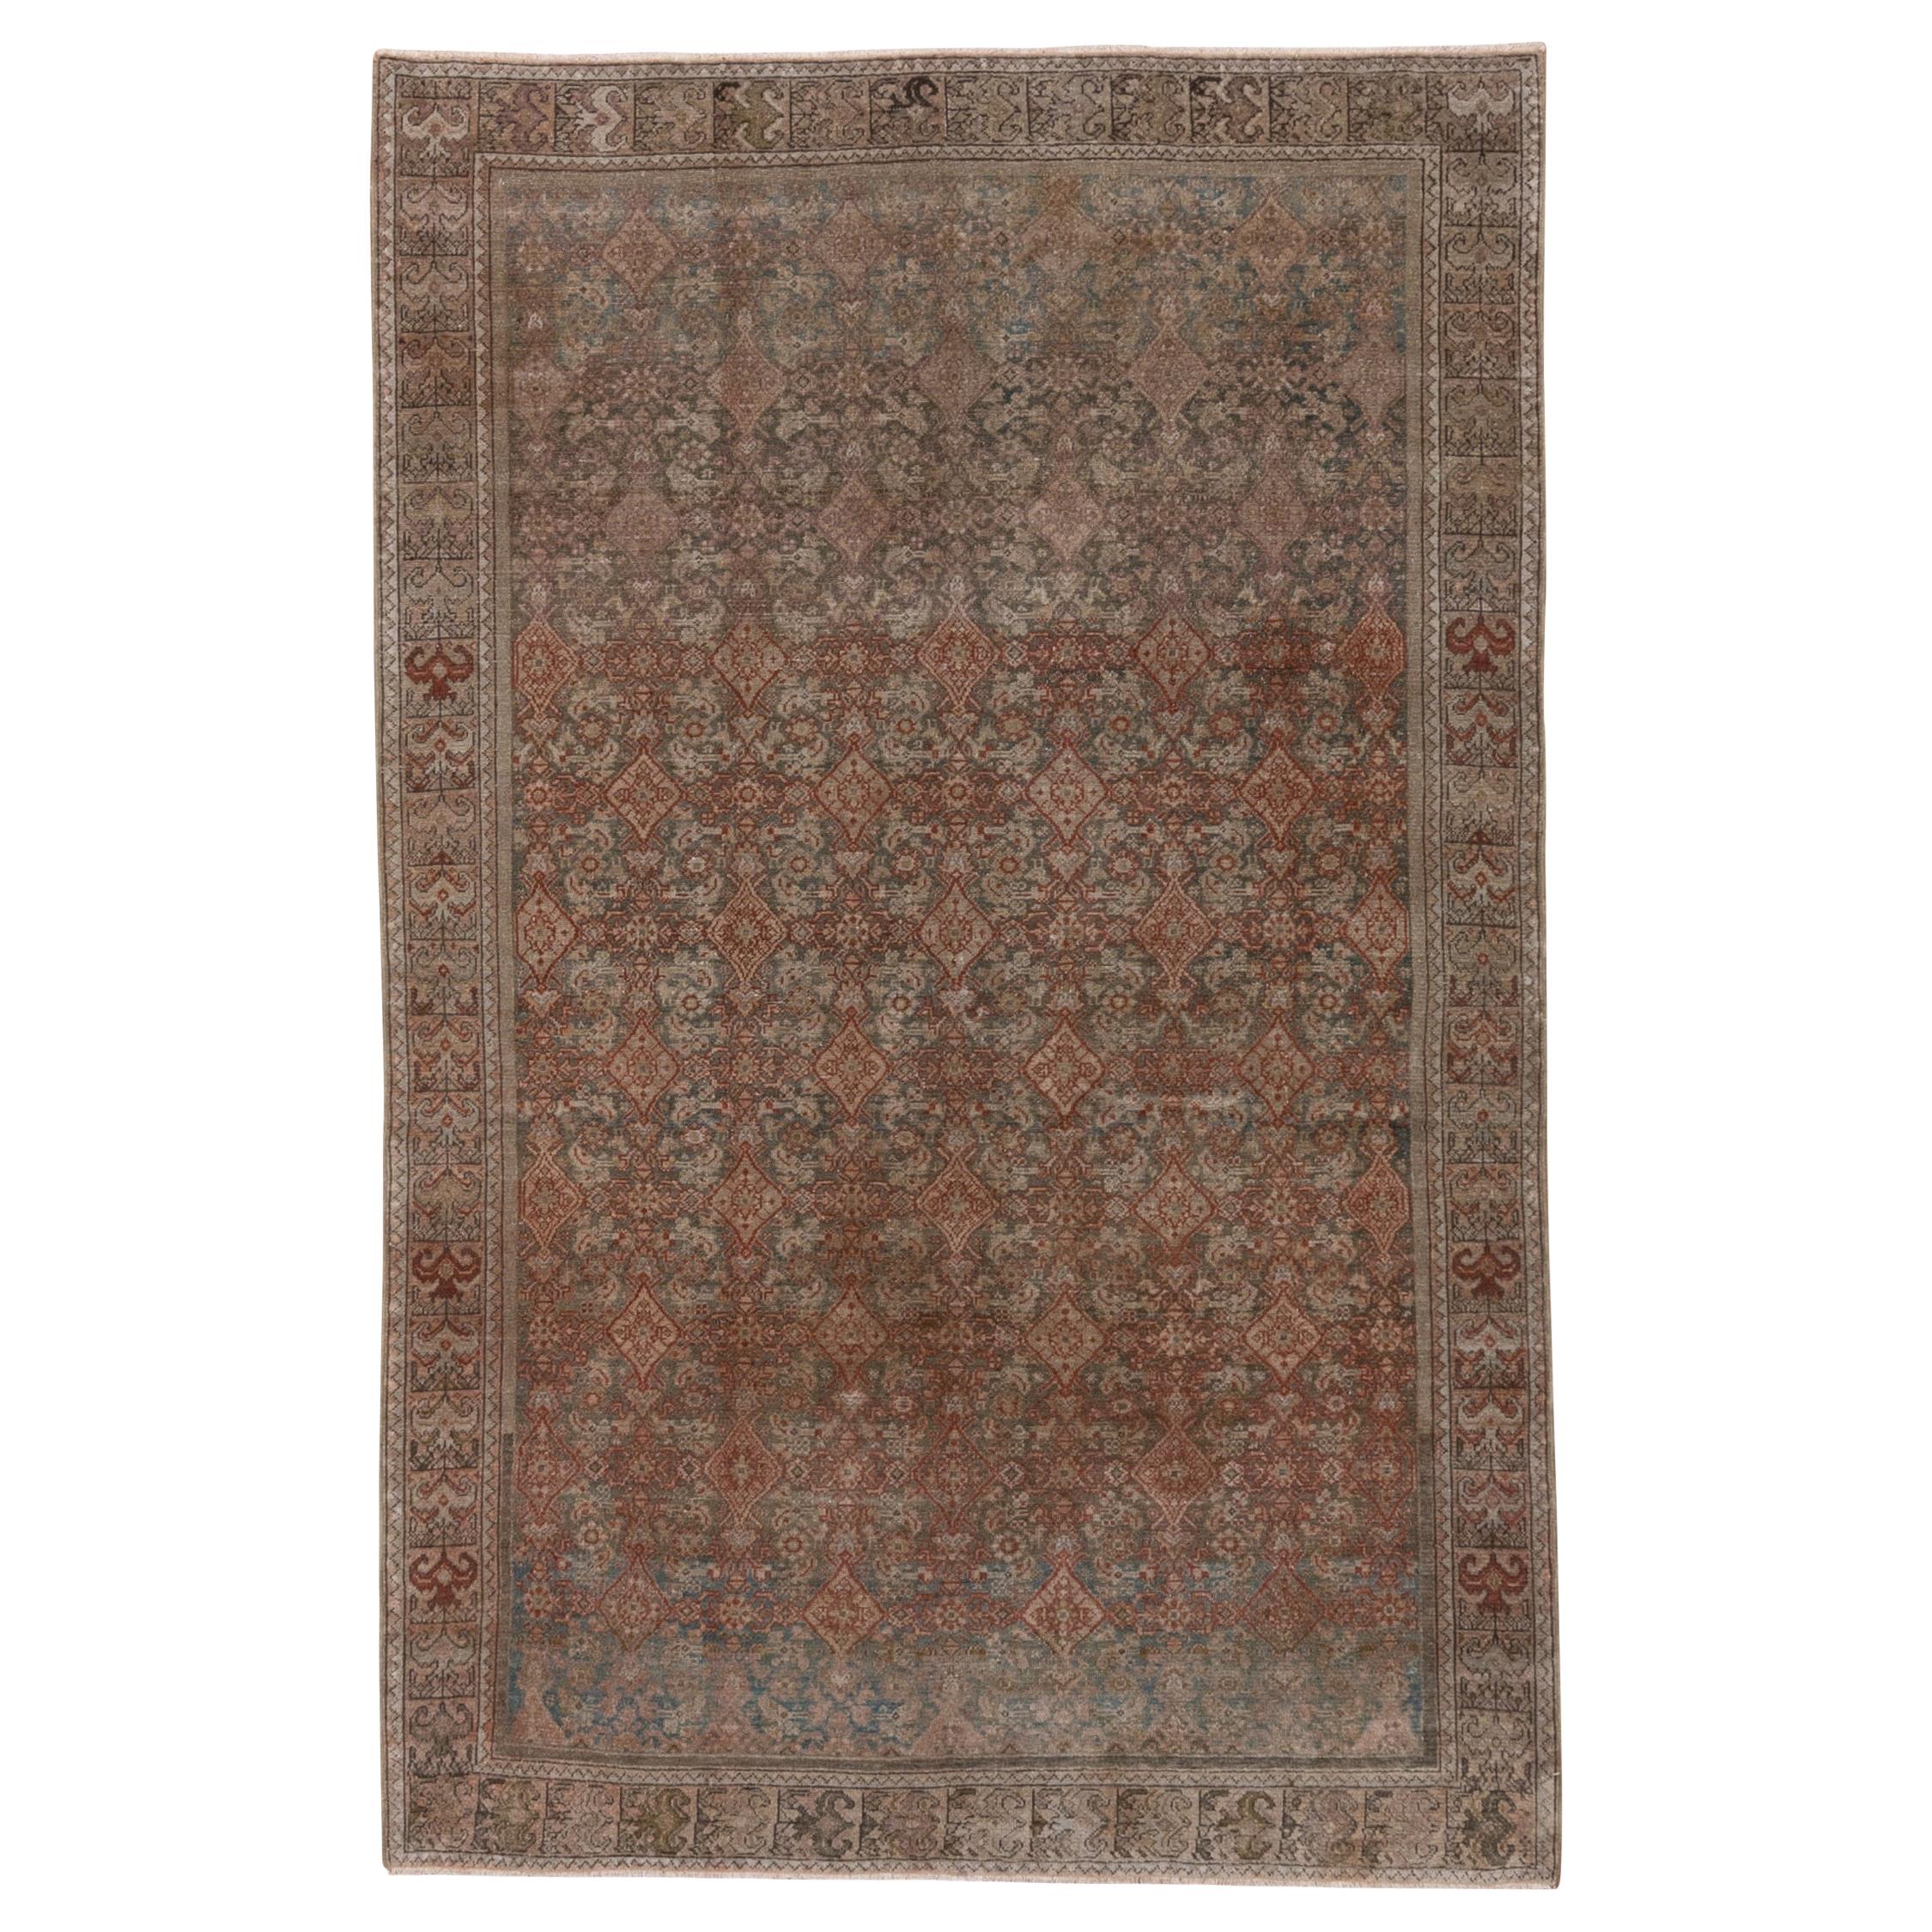 Rustic Antique Persian Malayer Rug, All-Over Brown and Blue Herati Design Field